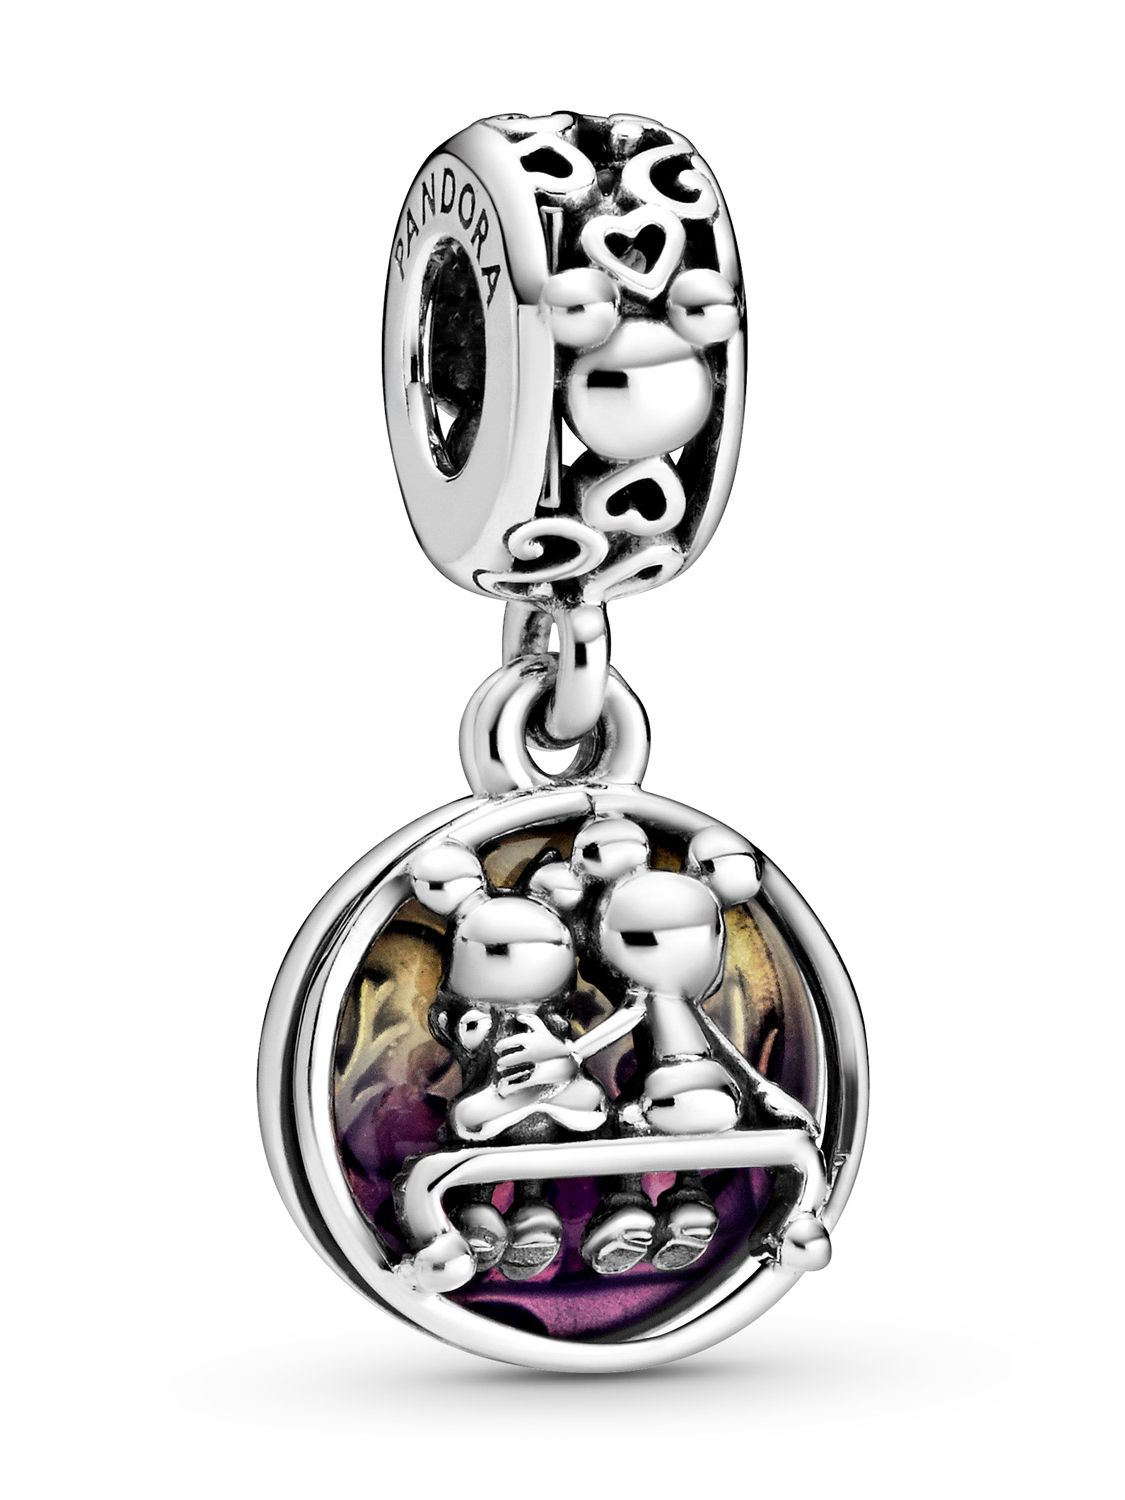 Minnie & Mickey Pendant Silver Charms Bead for 925 Sterling Necklace Bracelets